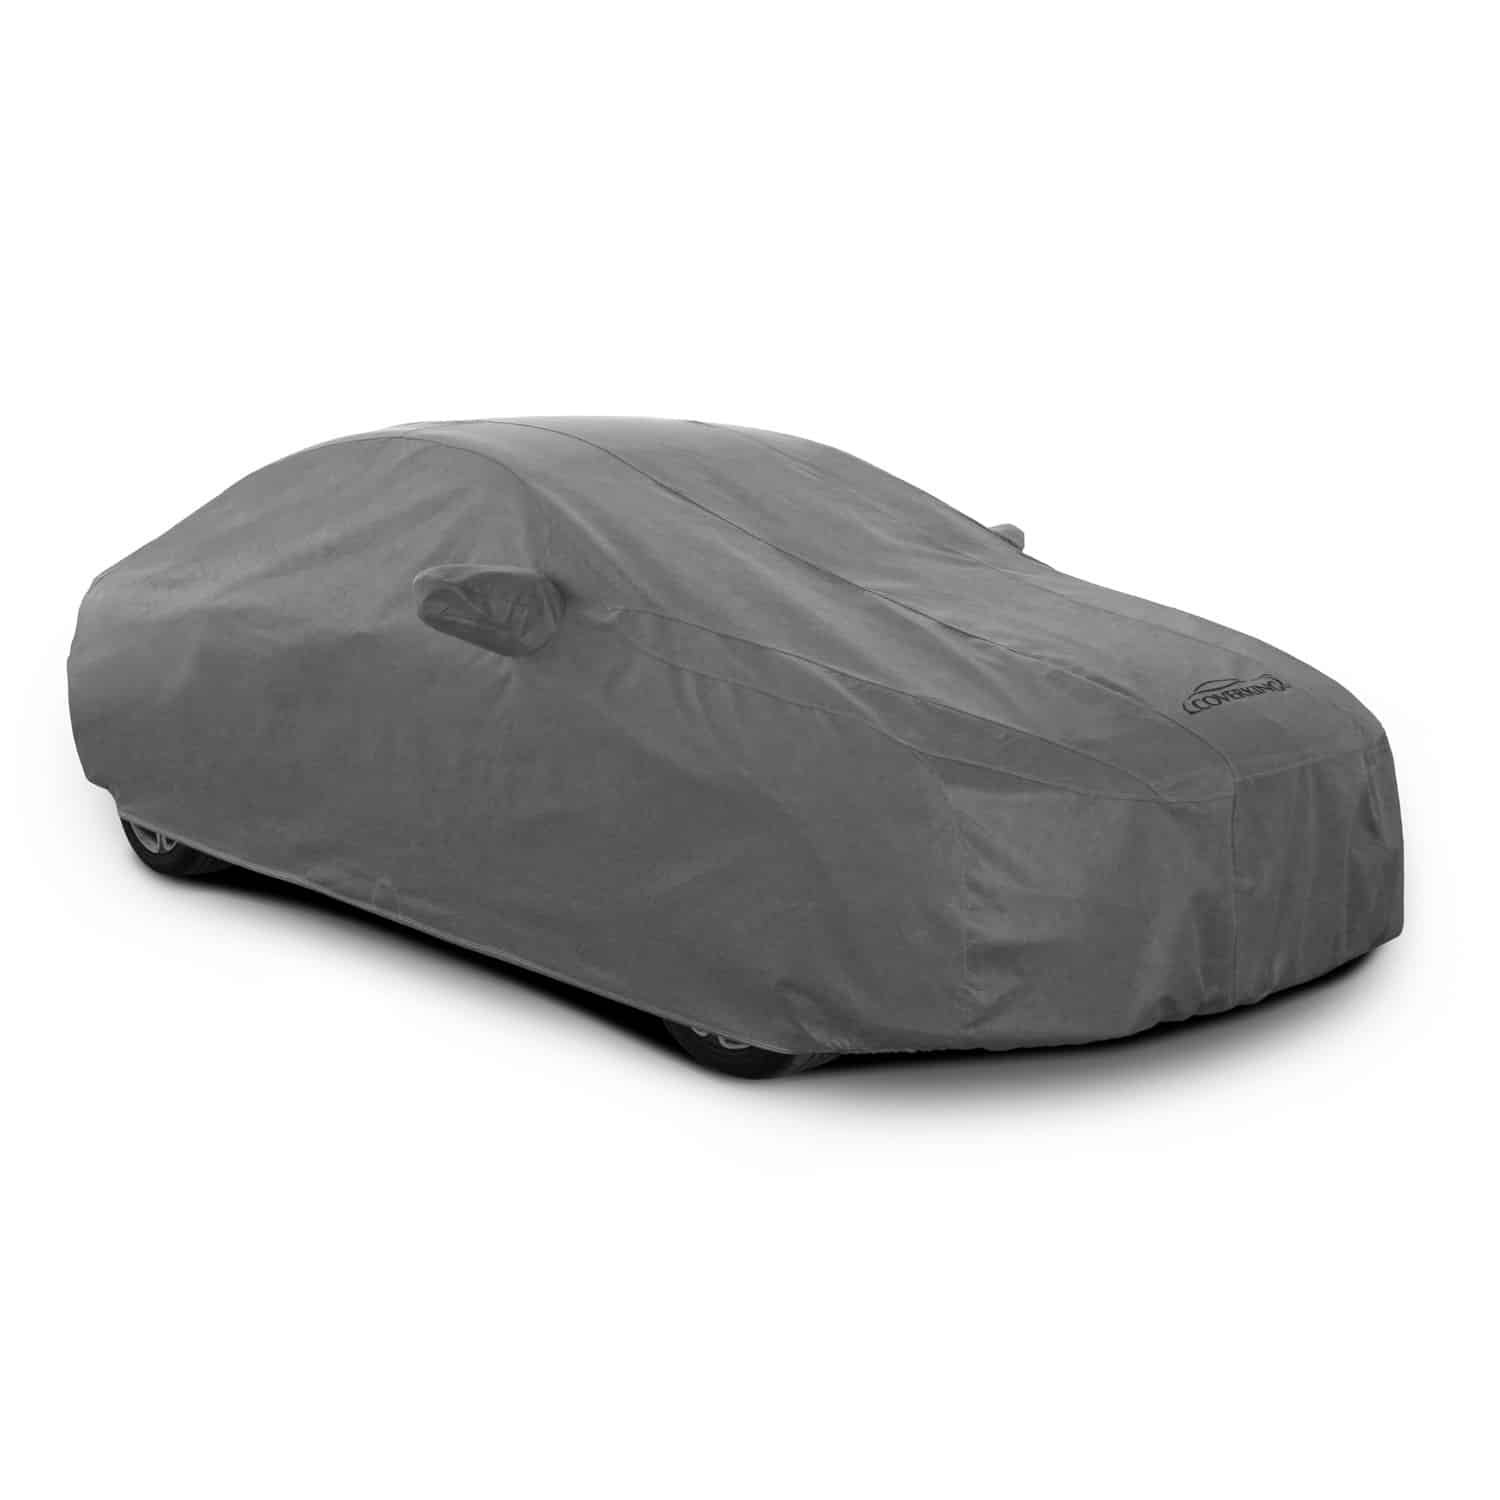 Car-Cover Outdoor Waterproof for BMW Z4